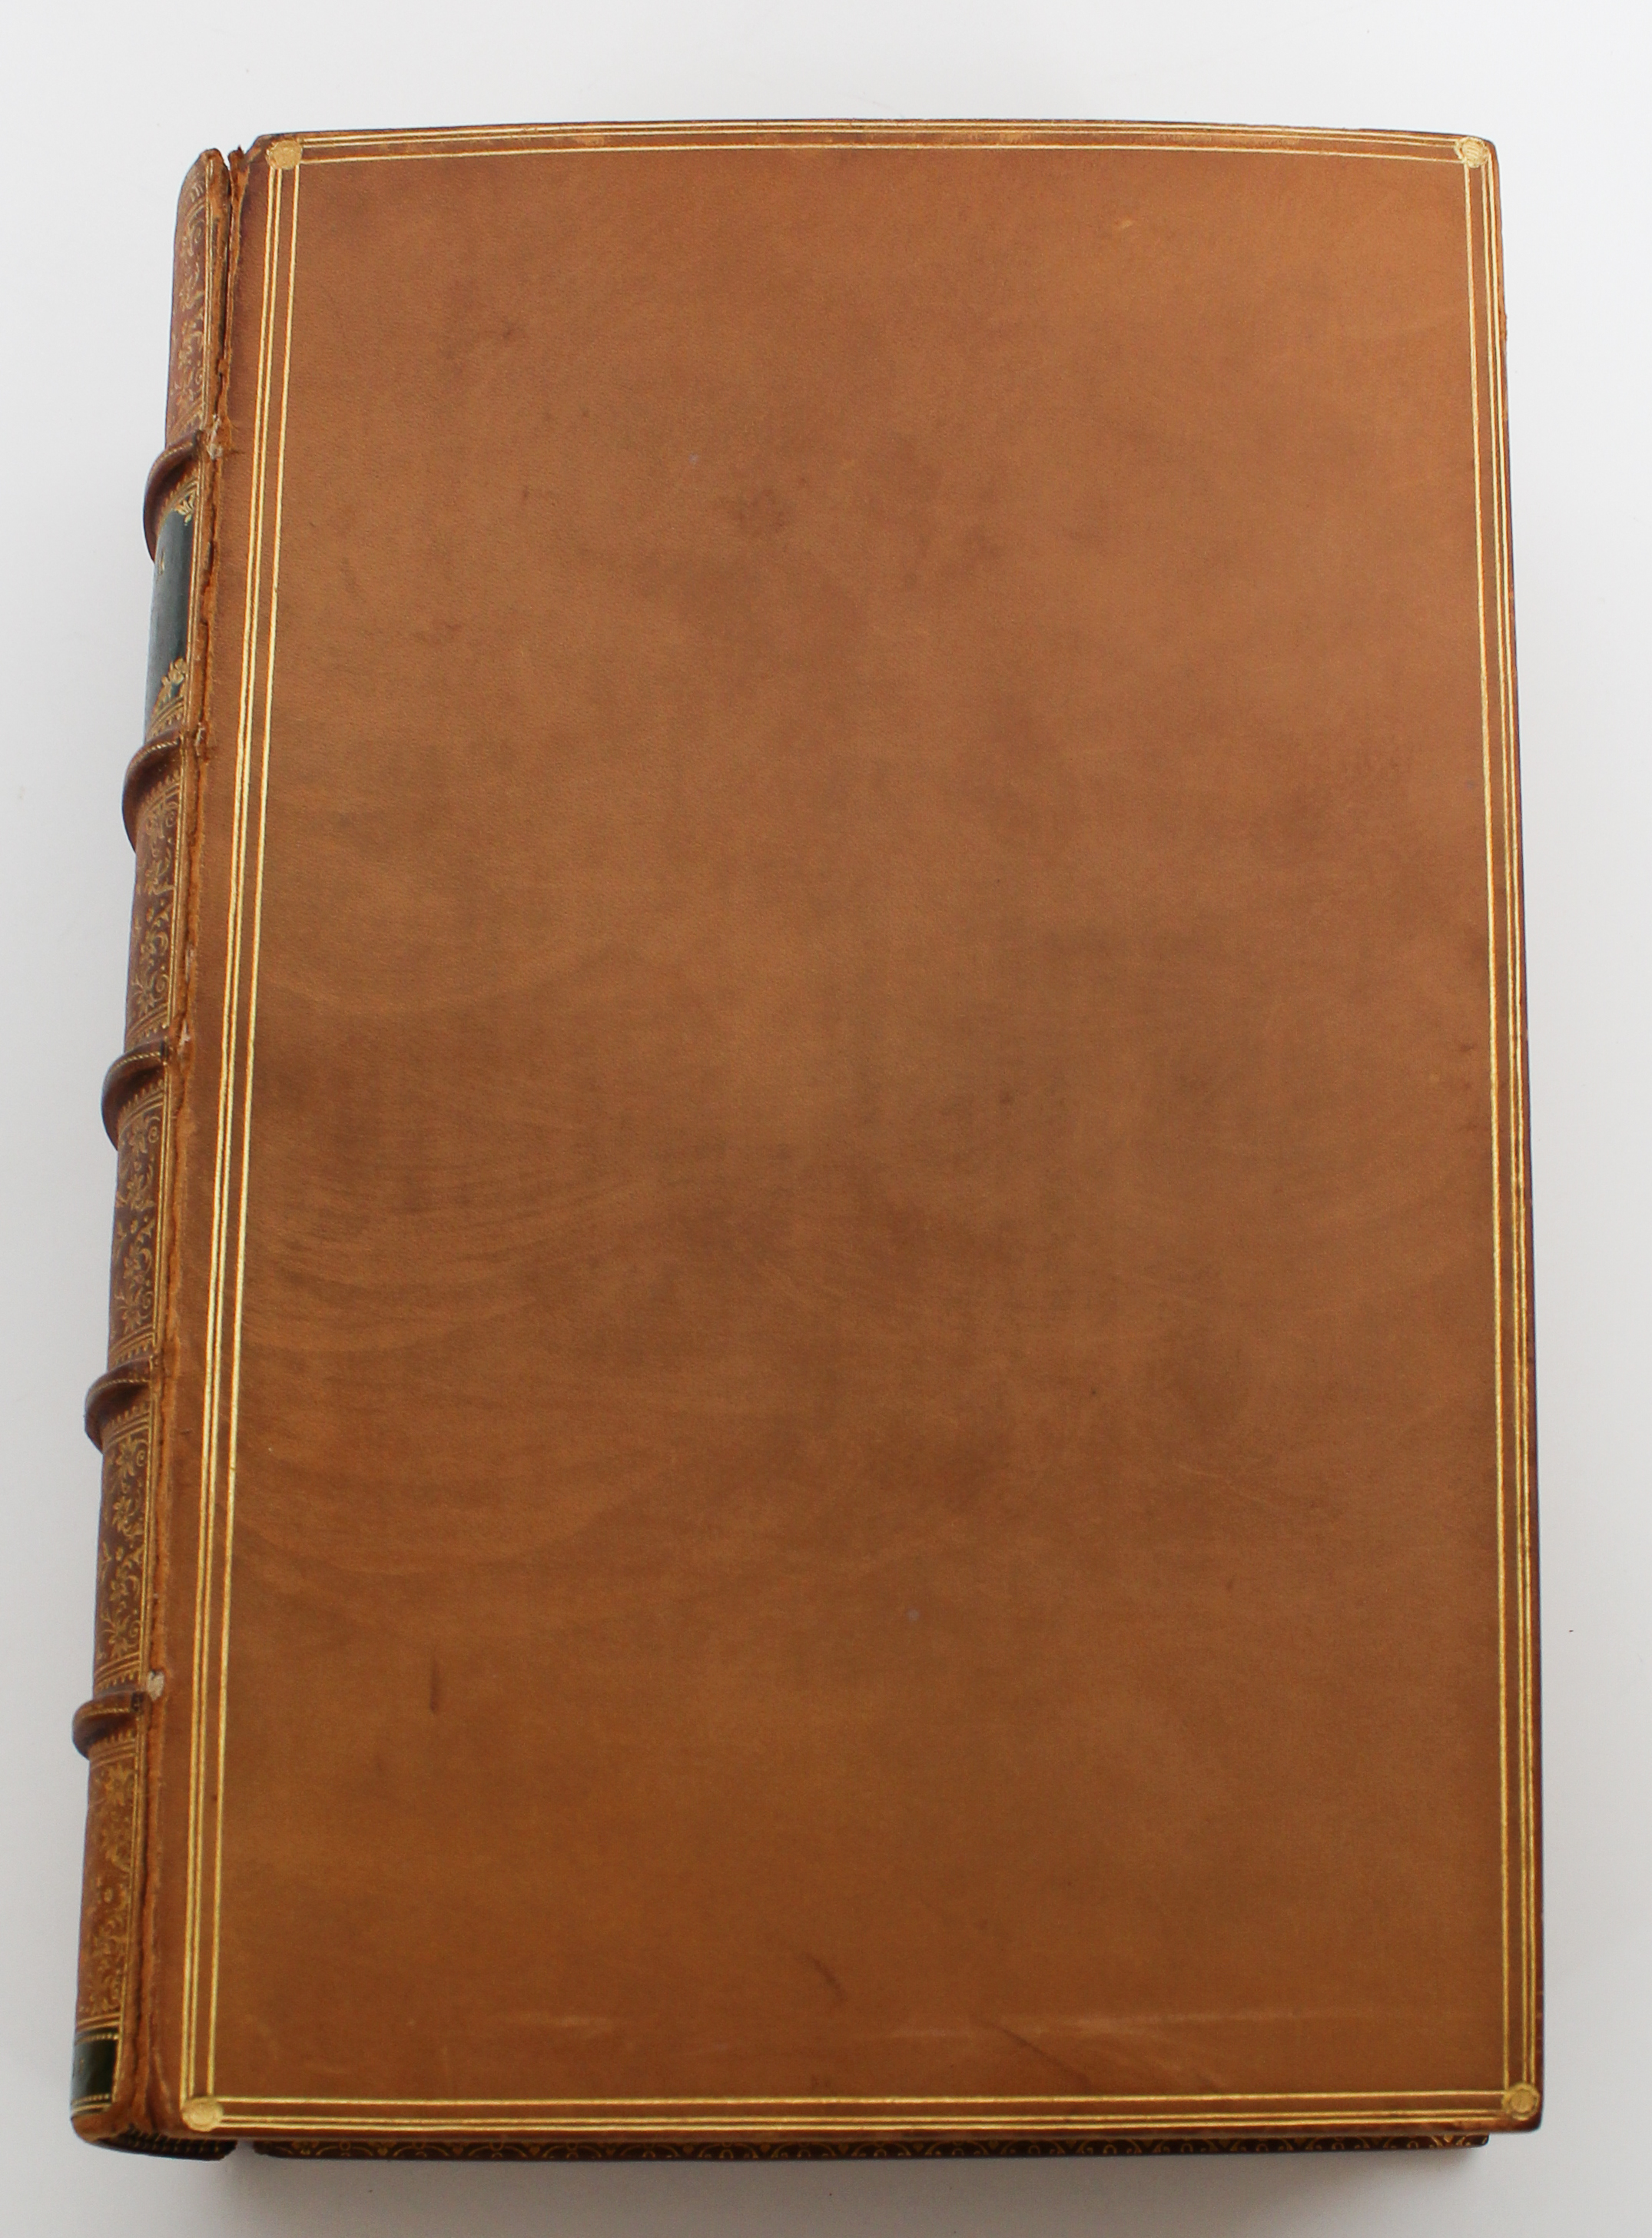 Dickens, Pickwick Papers, Book Form 1836 - Image 5 of 6